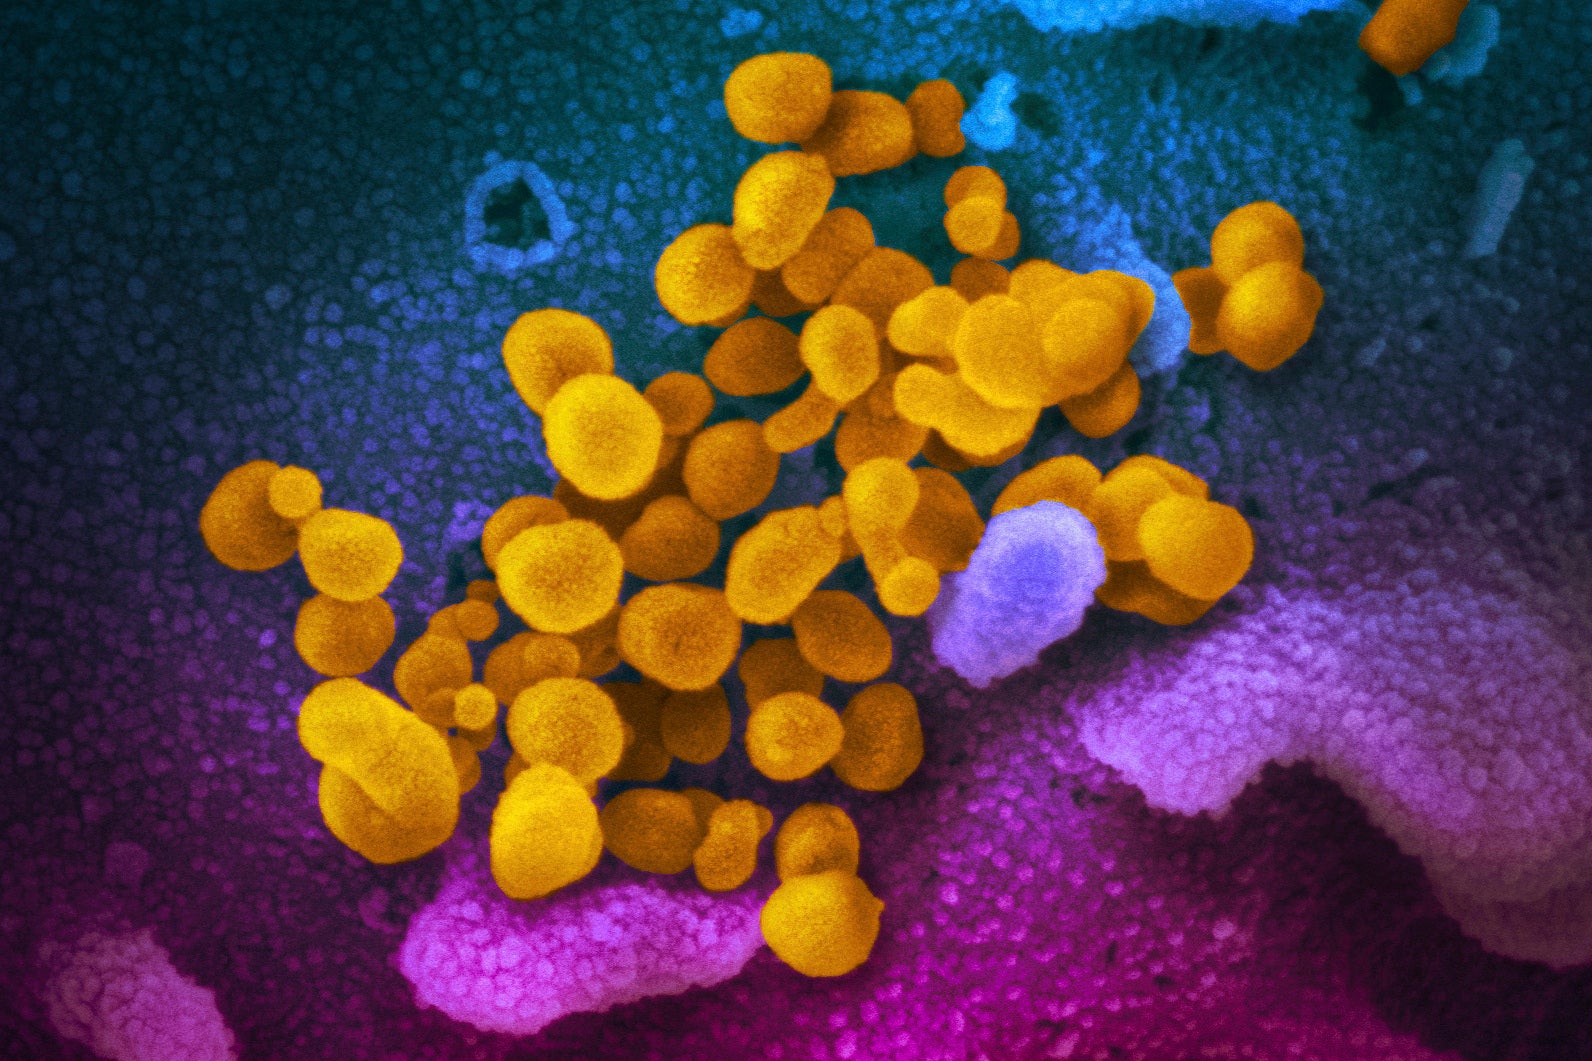 An electron microscope image from the US National Institutes of Health shows the novel coronavirus emerging from the surface of cells